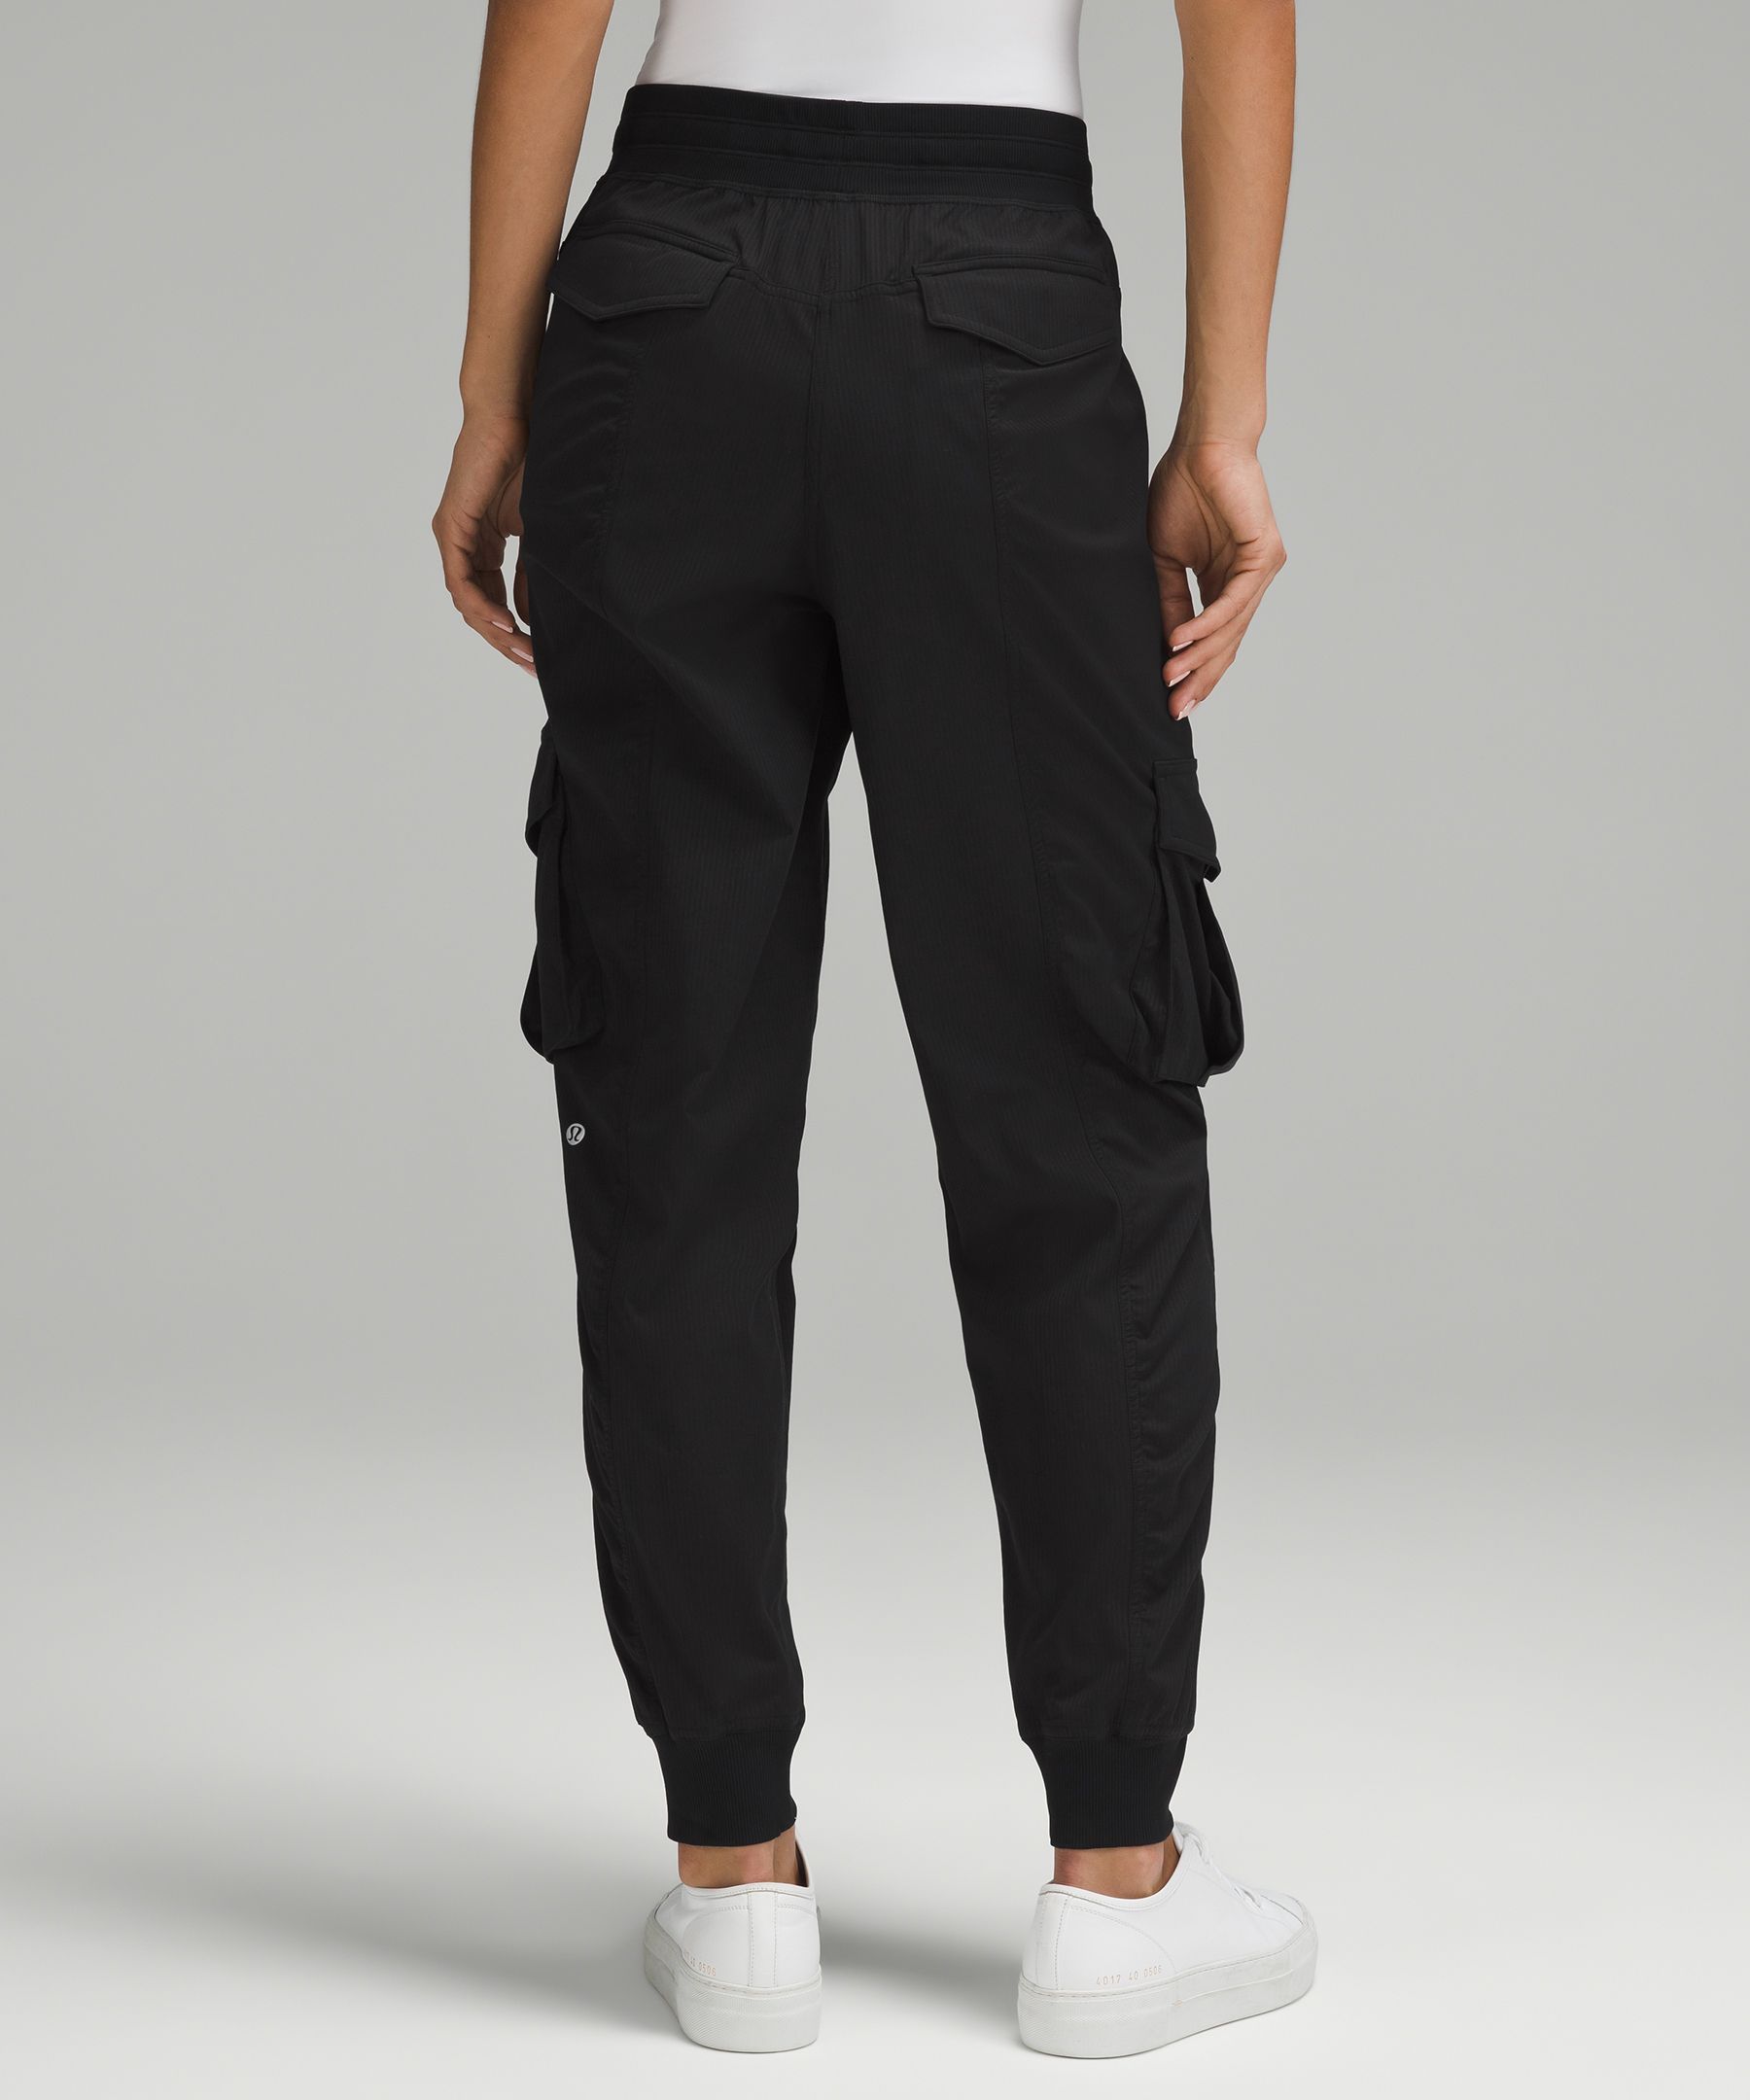 Womens Yoga Dance Studio Jogger 29 Loose Sports Running Trousers Mens With  Woven Pockets For Running, Gym, And Casual Wear Tig8368986 From G2be, $25.2